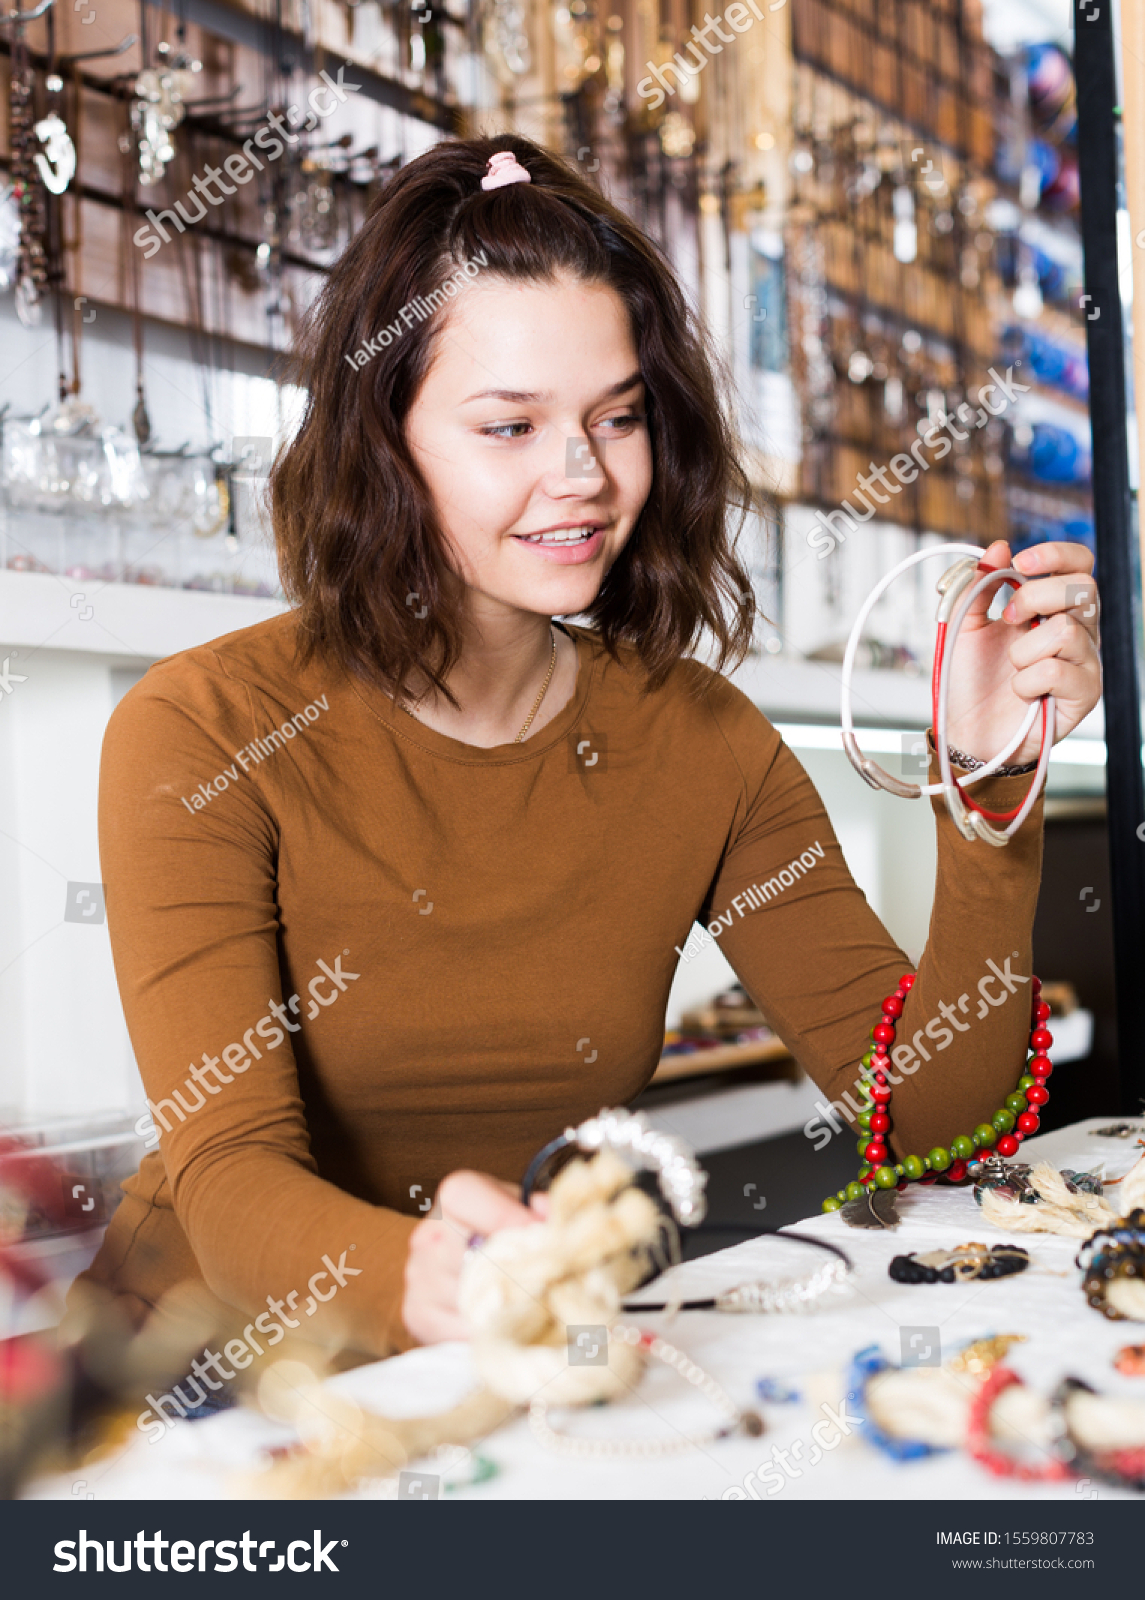 Smiling young woman showing different pendants in the market #1559807783